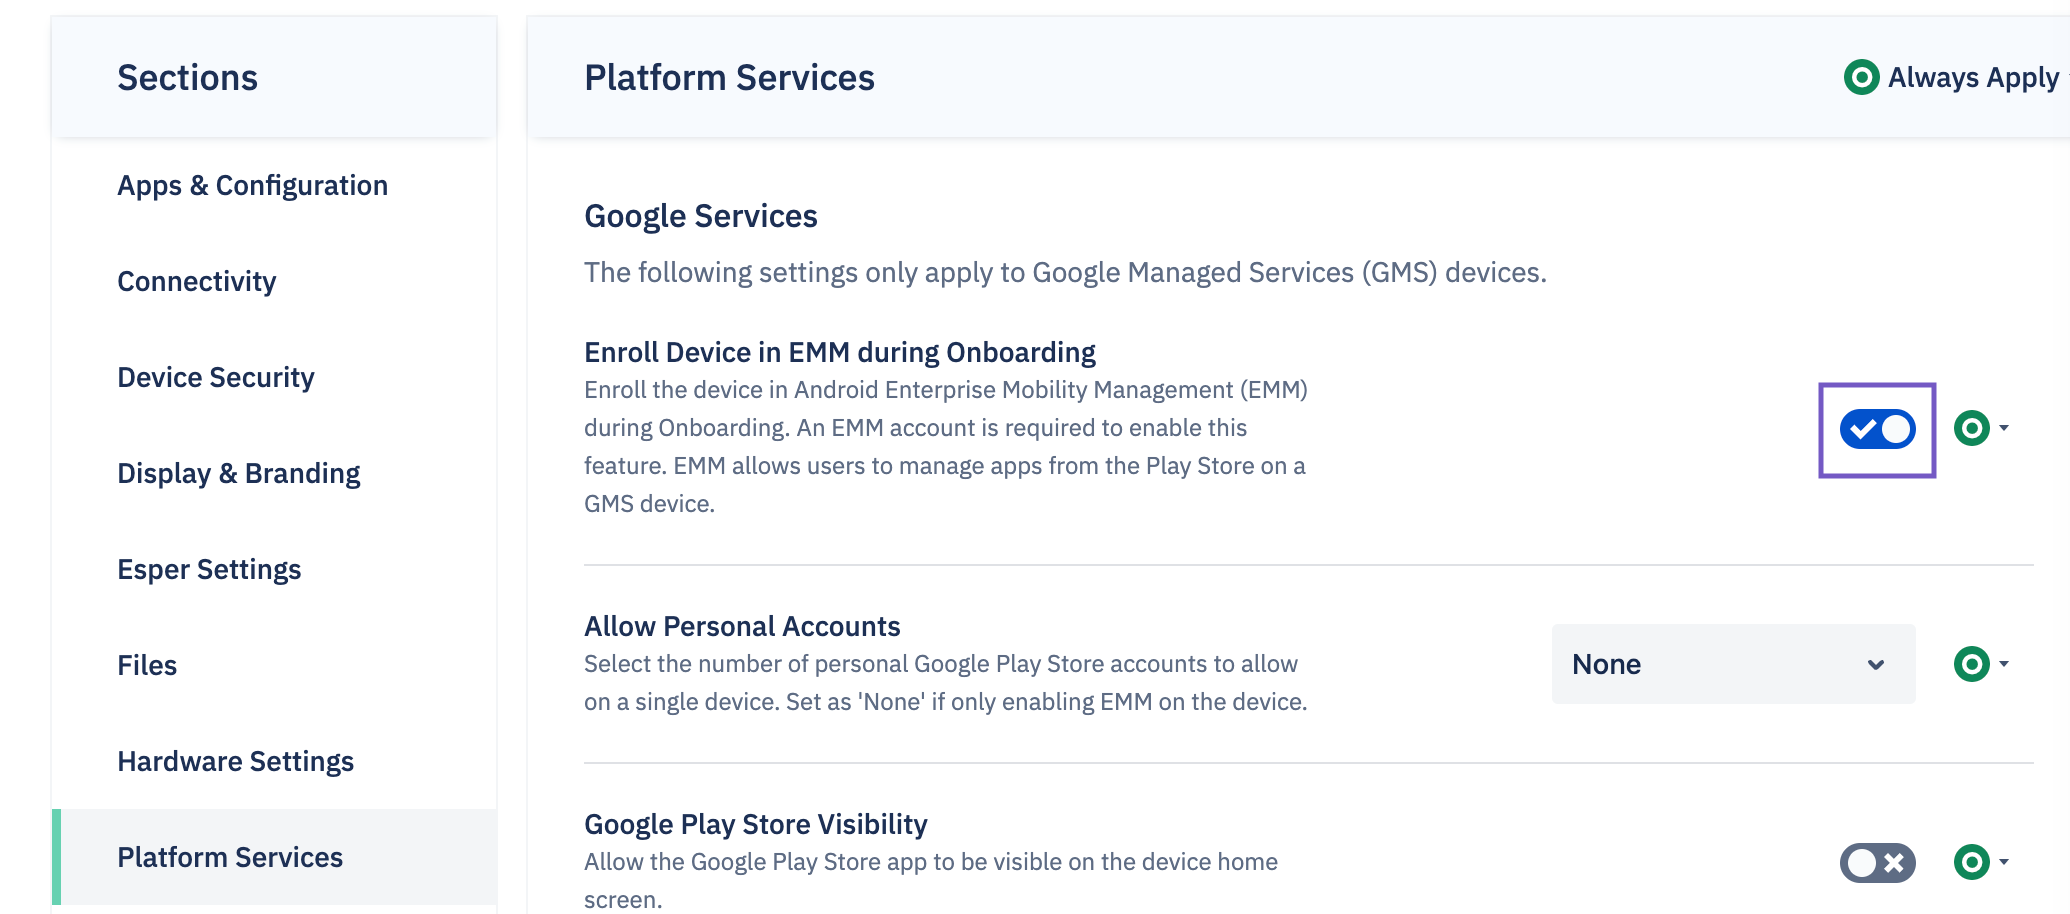 google-services-enroll-device-in-emm-enabled.png